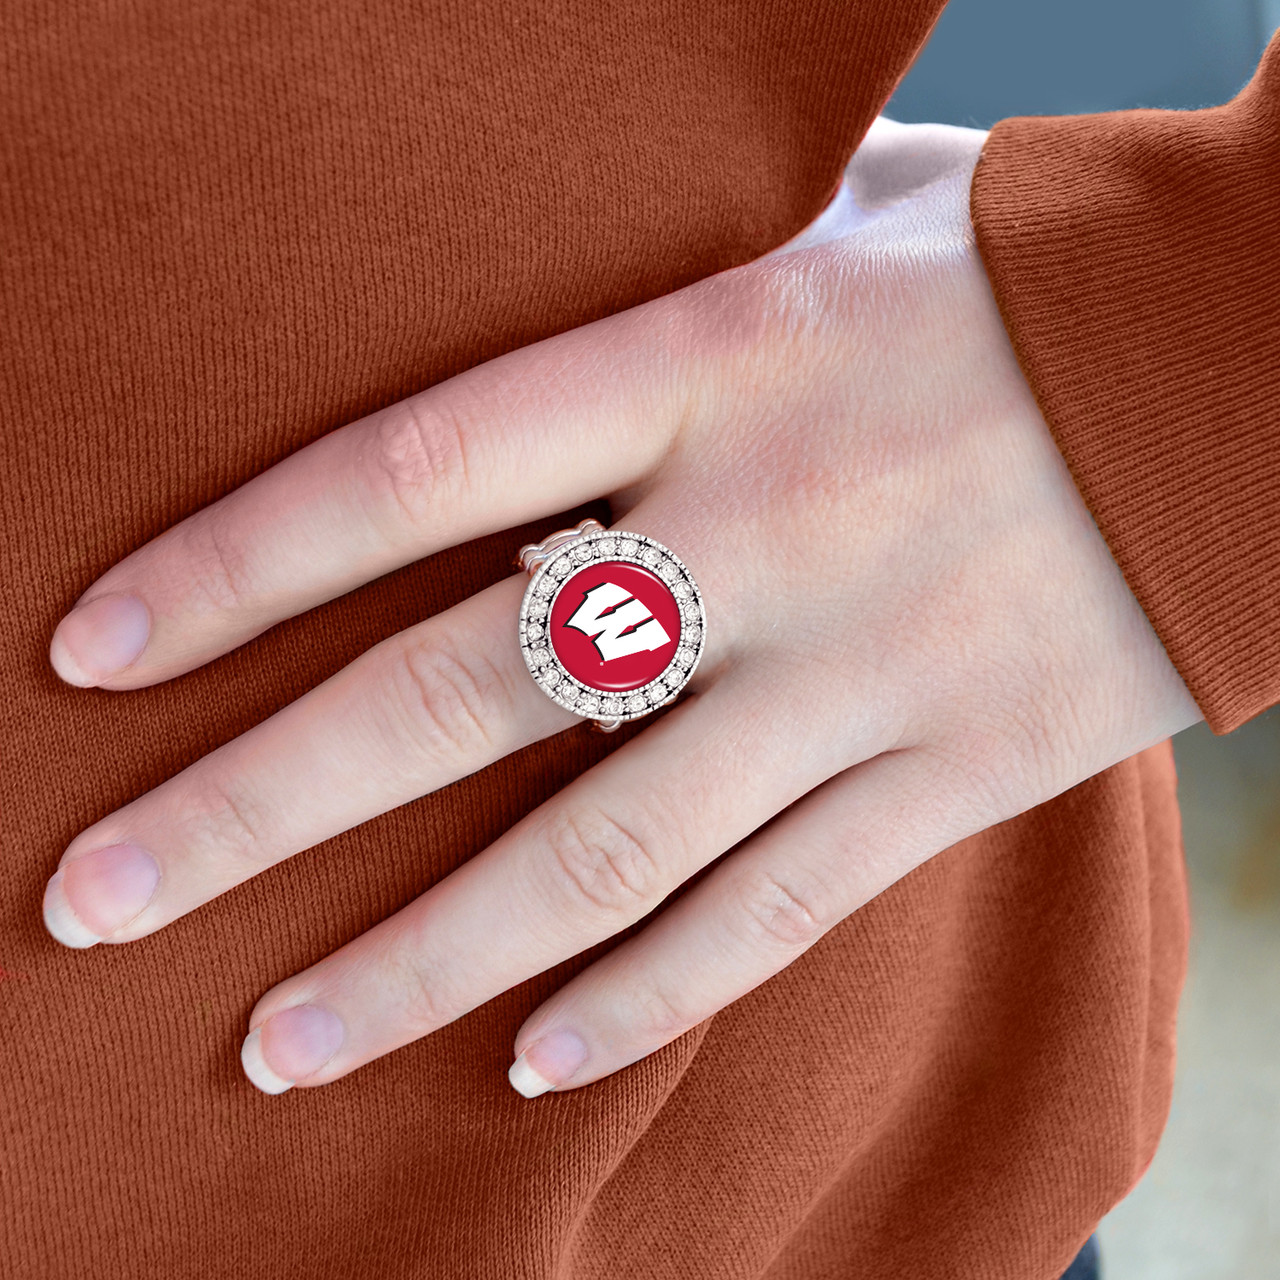 Wisconsin Badgers Stretch Ring- Crystal Round